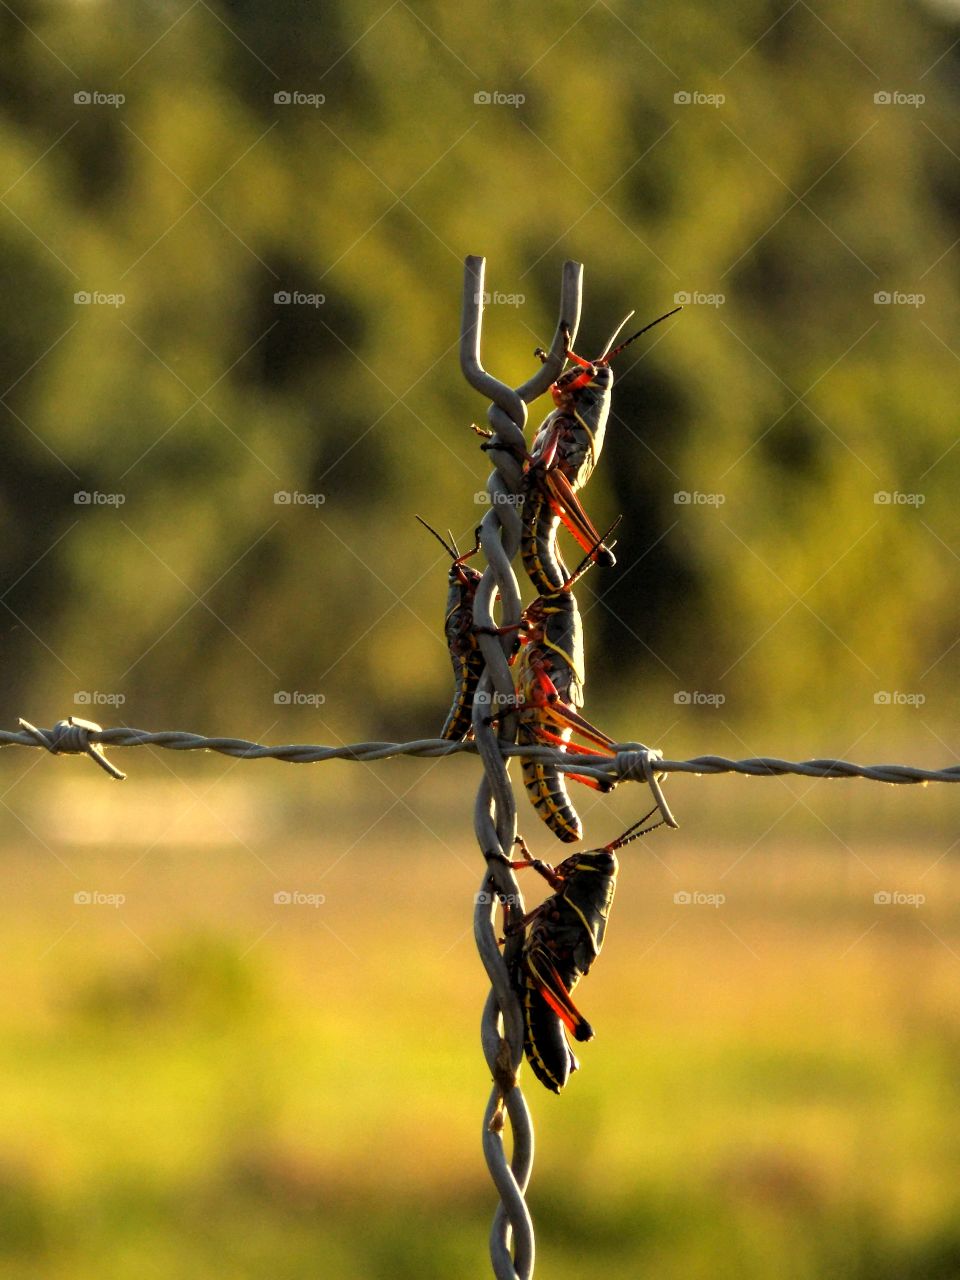 Locusts on barb wire